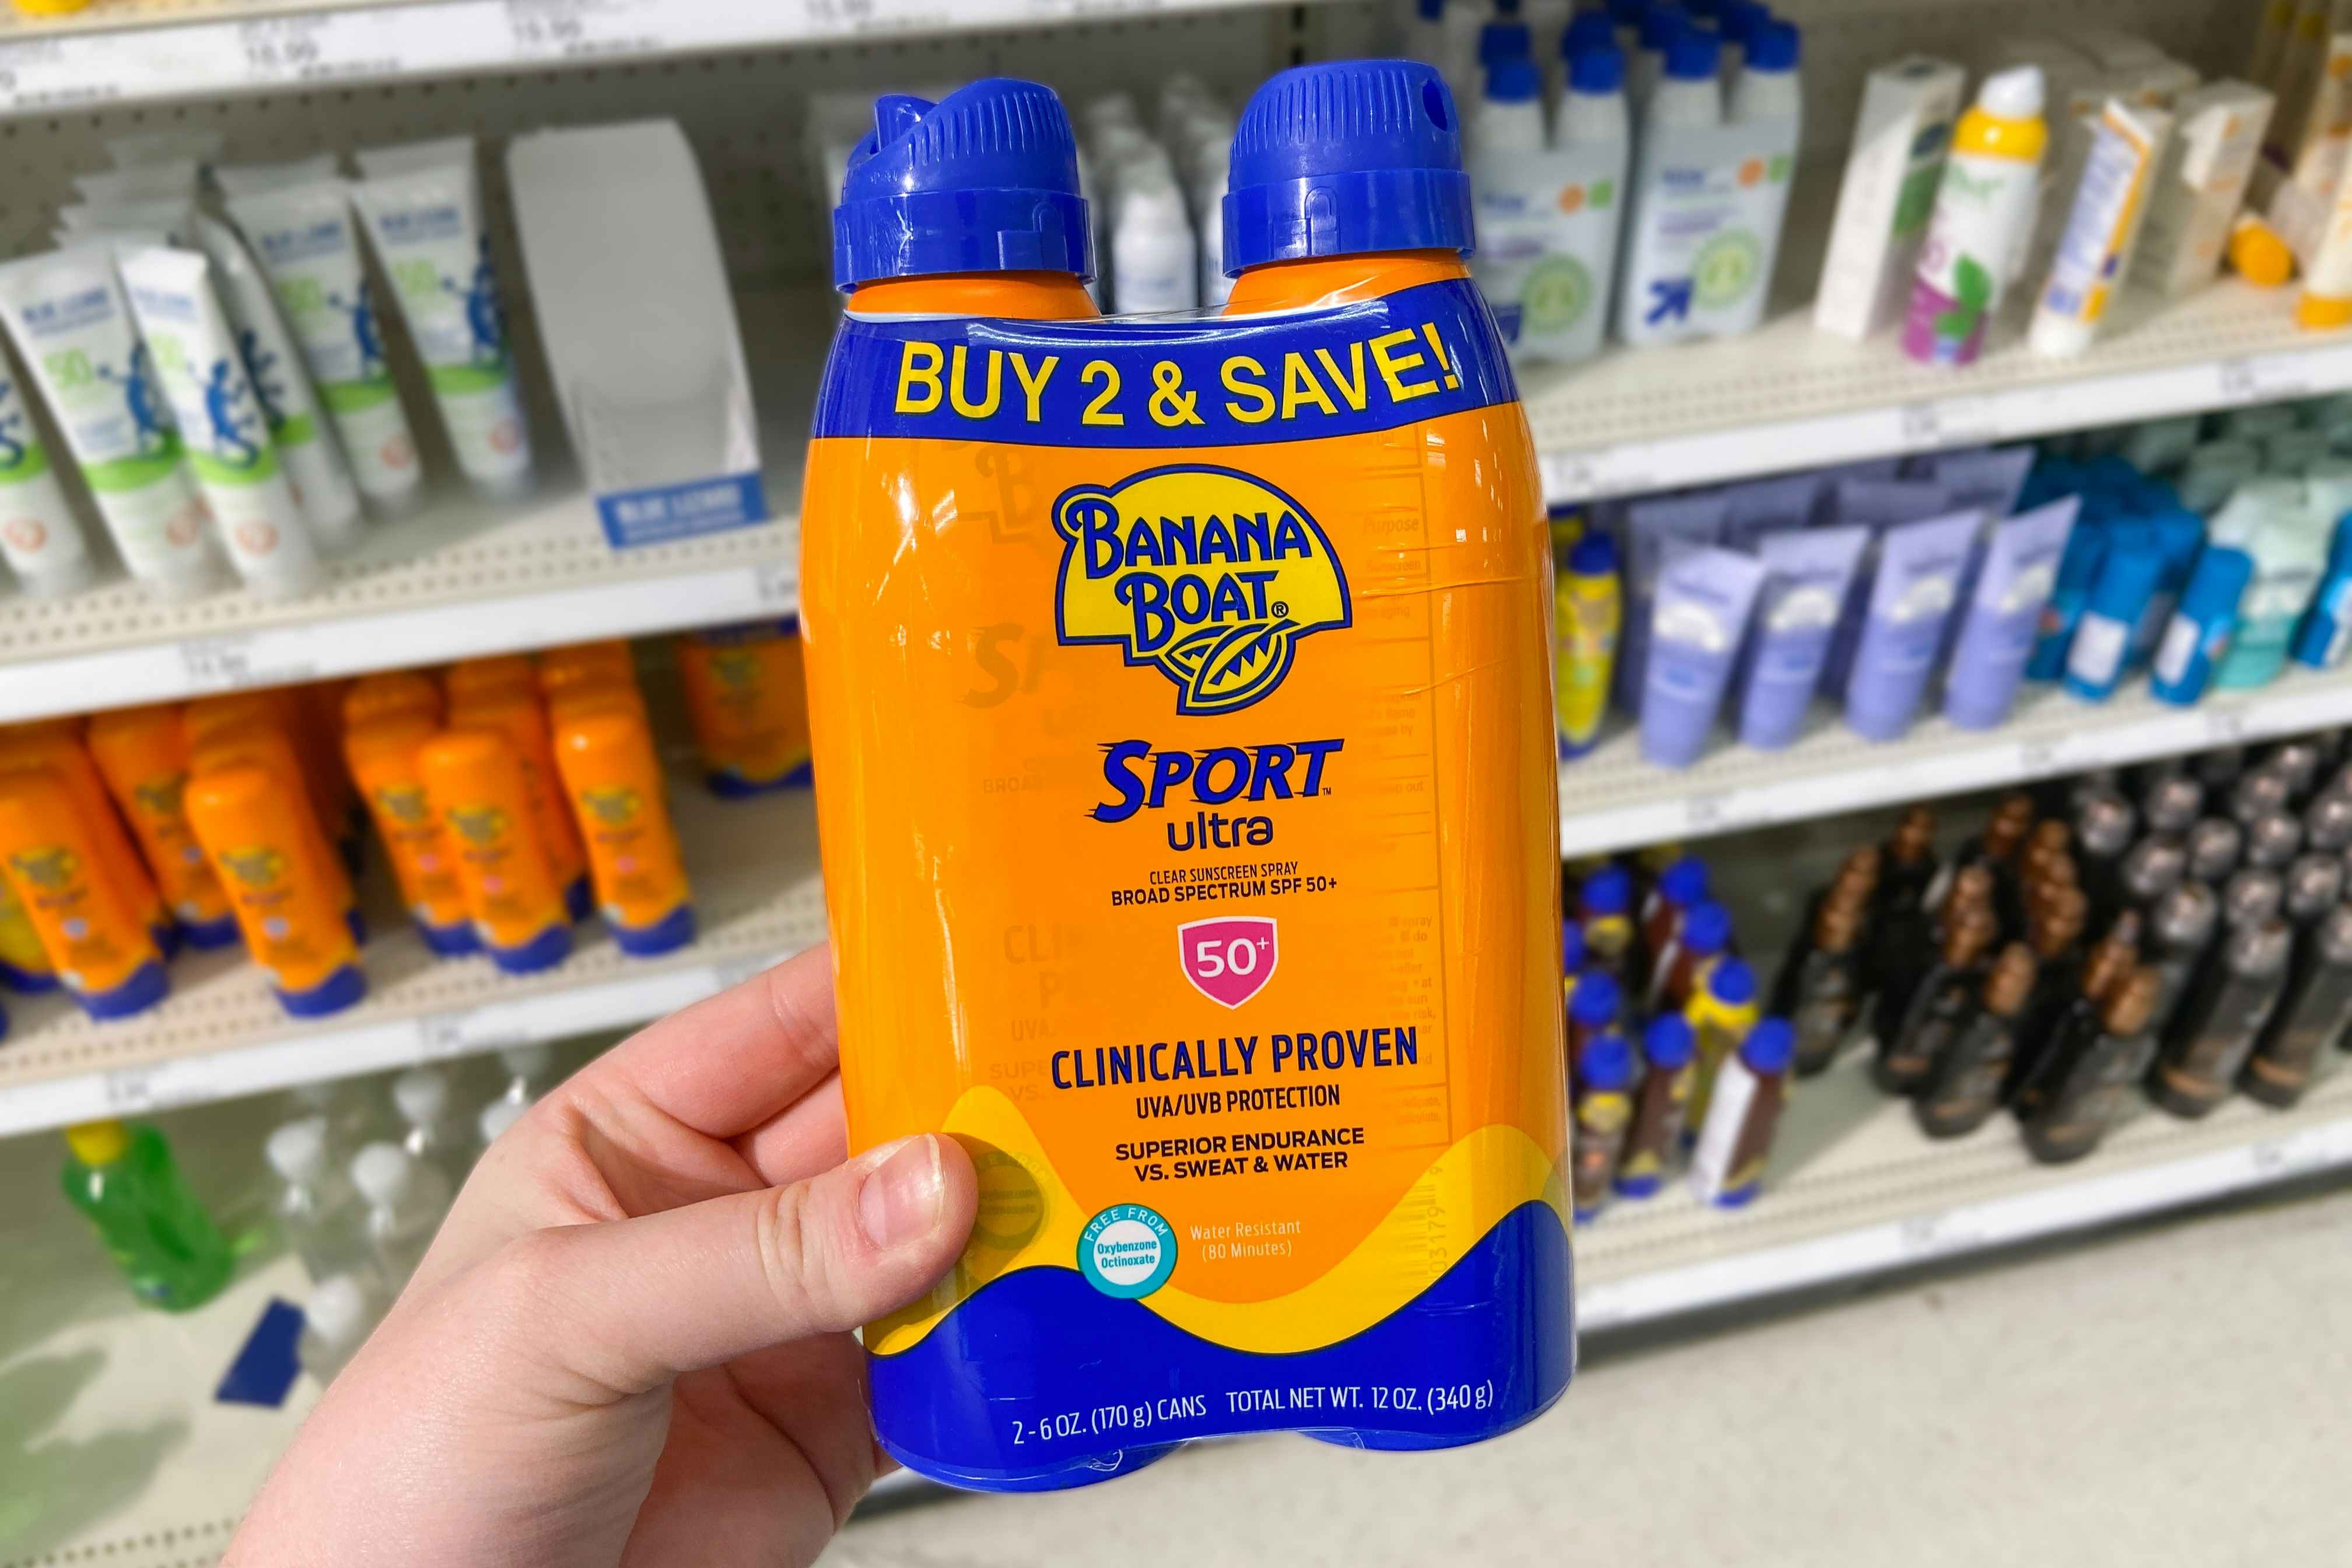 Banana Boat Sunscreen Deals, as Low as at $5.57 on Amazon